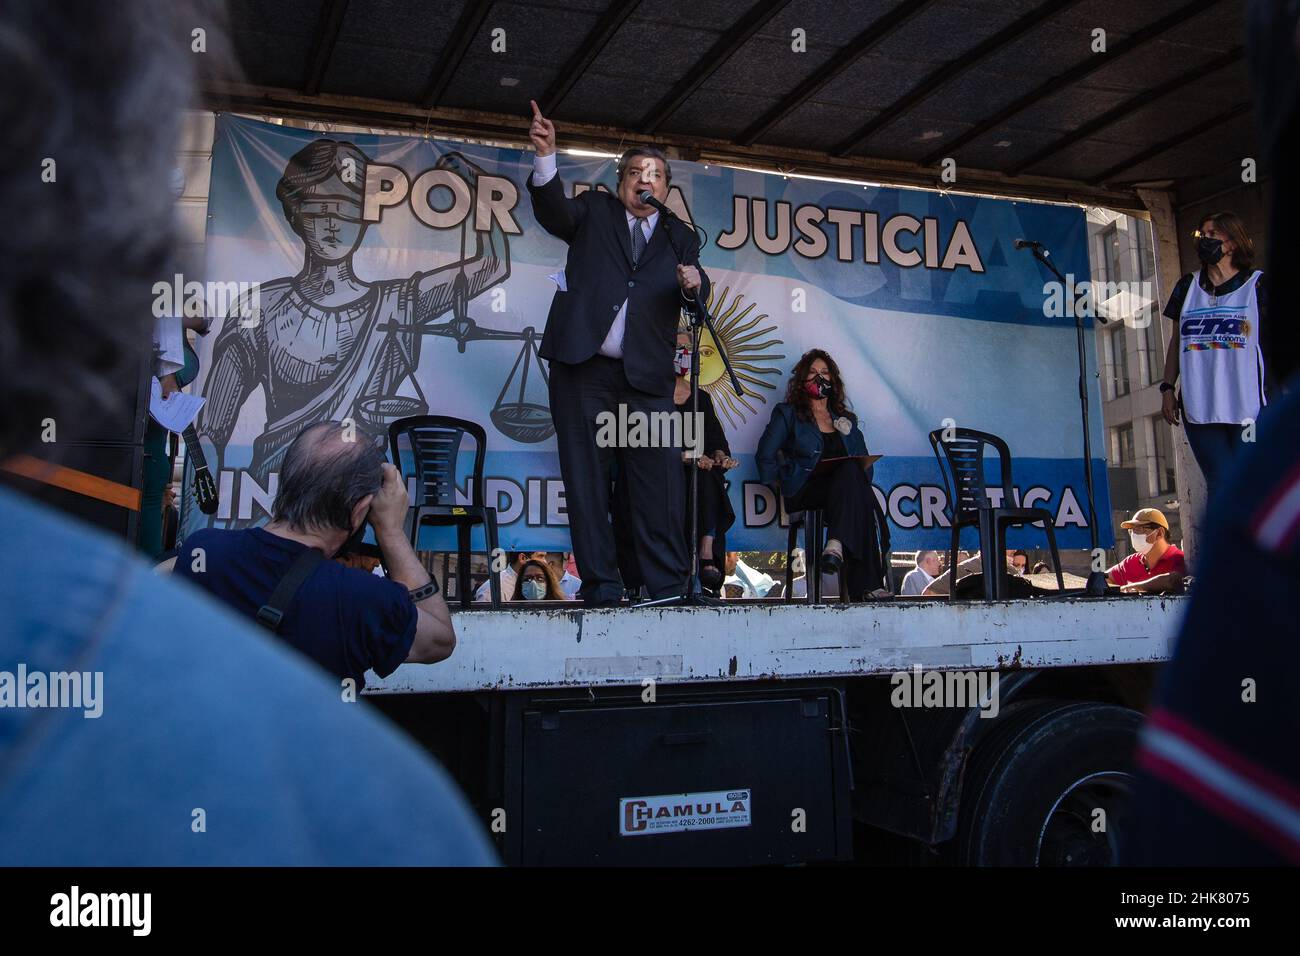 Judge, Juan María Ramos Padilla, one of the main promoters of the call, gives his speech during the demonstration.Under the expression 'Democratize Justice' various social, political, trade union and human rights organizations mobilized, yesterday 1 February, to the Lavalle Square in the Buenos Aires center. The call, which was organized for 6 pm, took place in front of the Palace of Justice. The protesters shouted slogans like 'Stop Impunity', demanded 'the end of lawfare', repudiated 'a Mafia Supreme Court' and demanded a Judicial Reform. The march was attended by Judge Juan María Ramos Padi Stock Photo